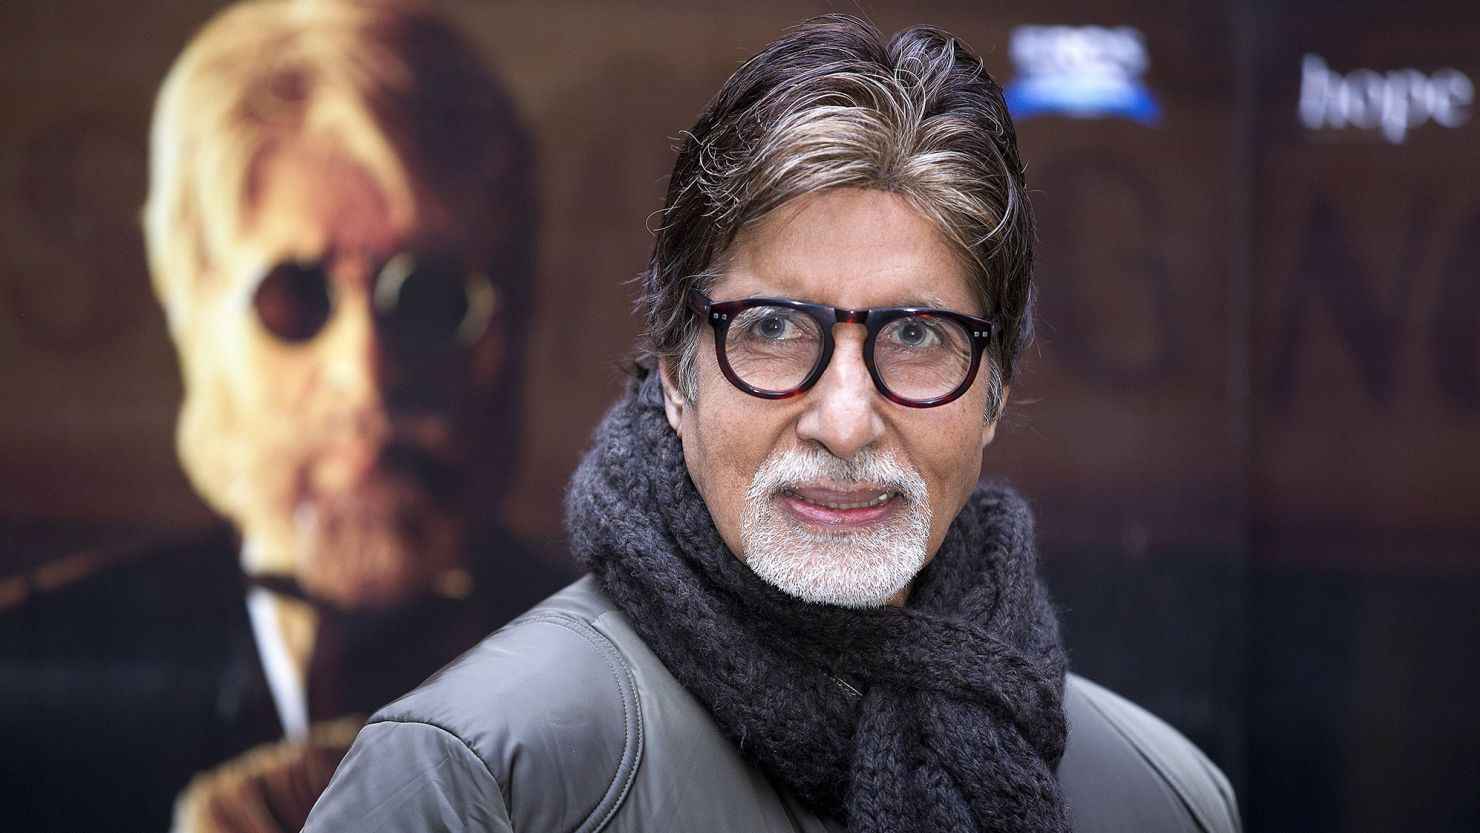 Amitabh Bachchan at a promotional event for the movie "Shamitabh" in London on January 27, 2015. 